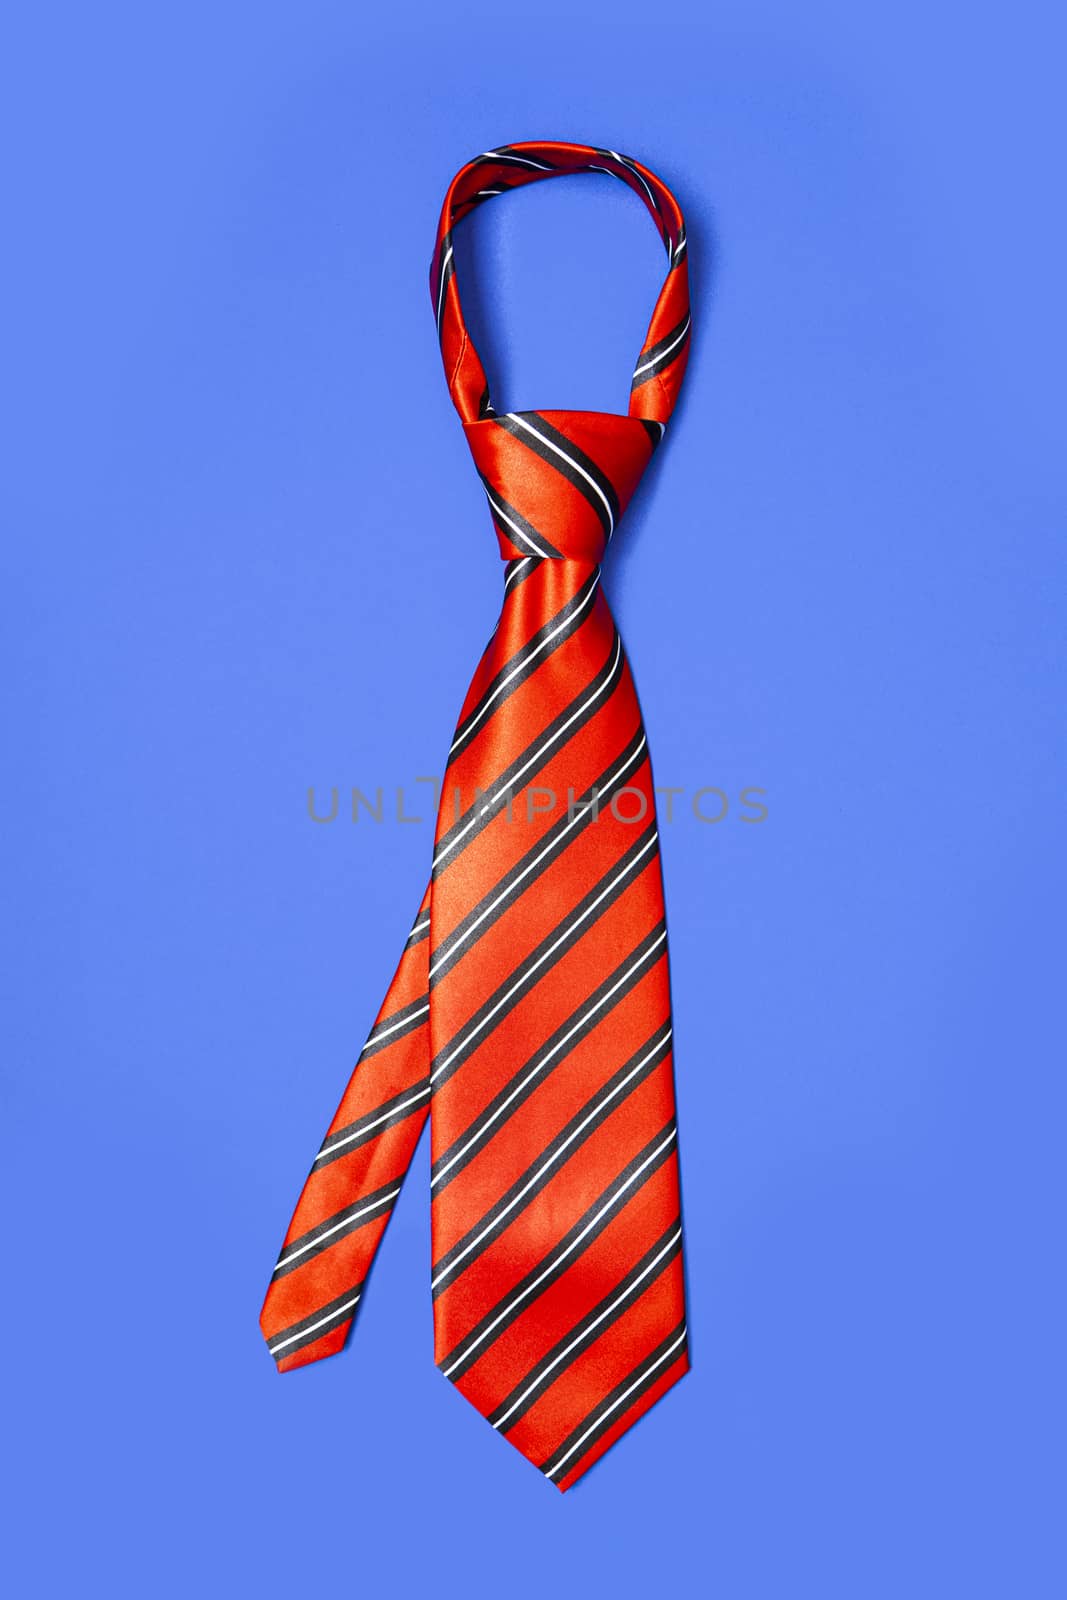 Red men's striped tie taken off for leisure time, isolated on bl by SlayCer